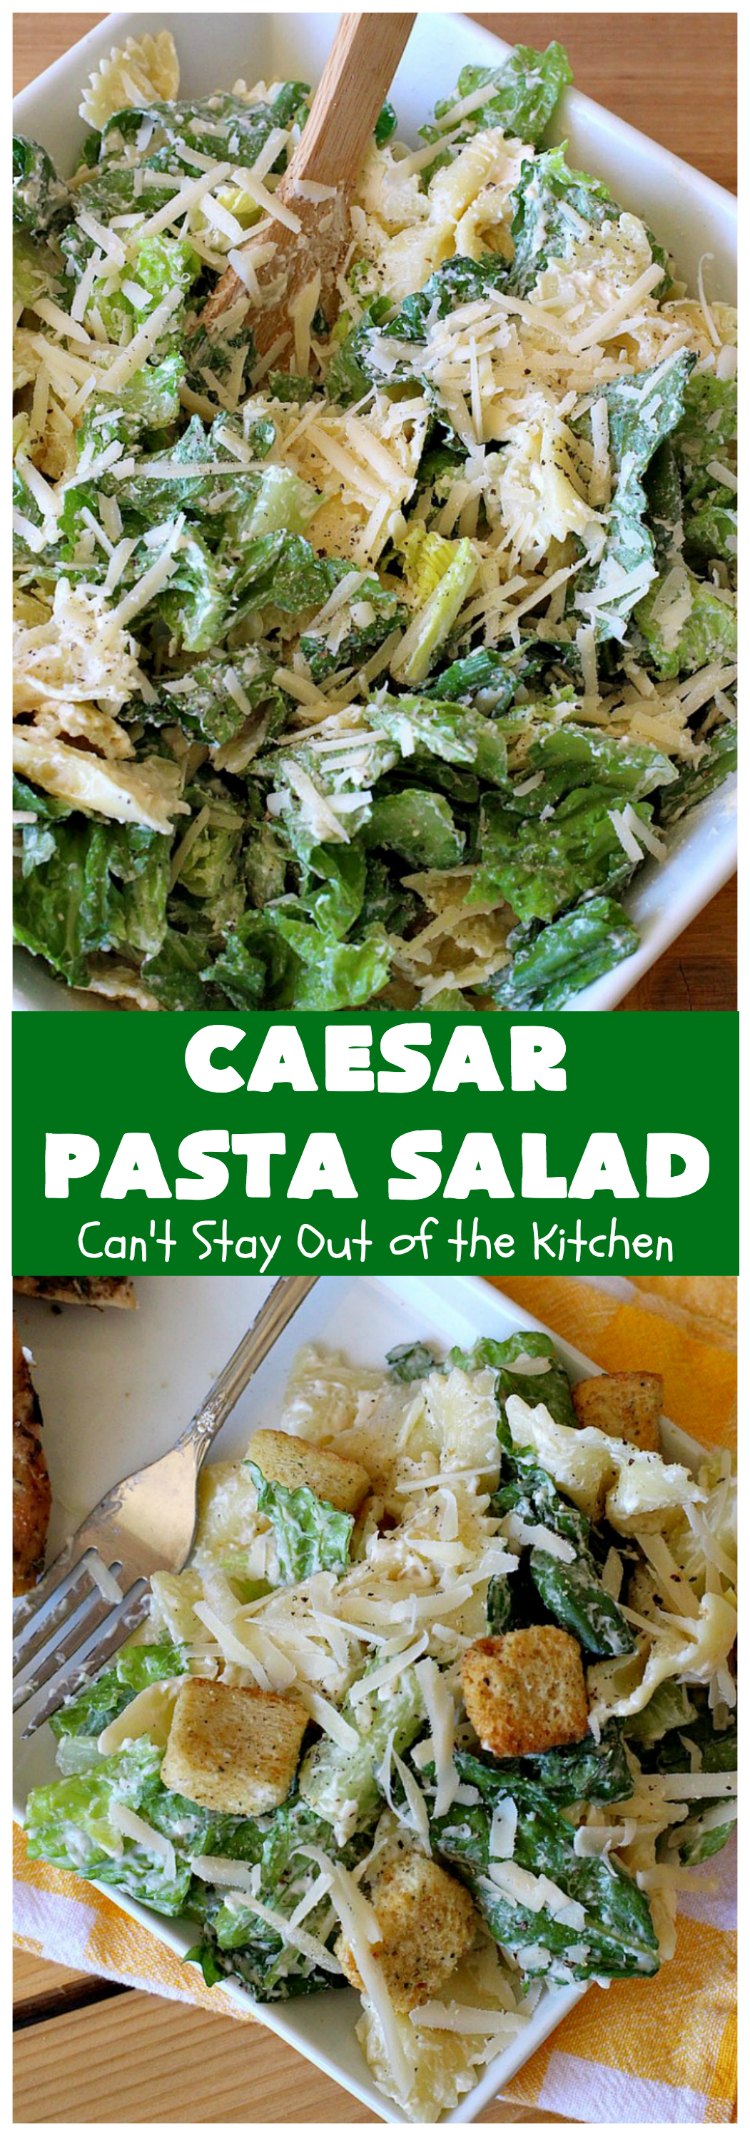 Caesar Pasta Salad | Can't Stay Out of the Kitchen